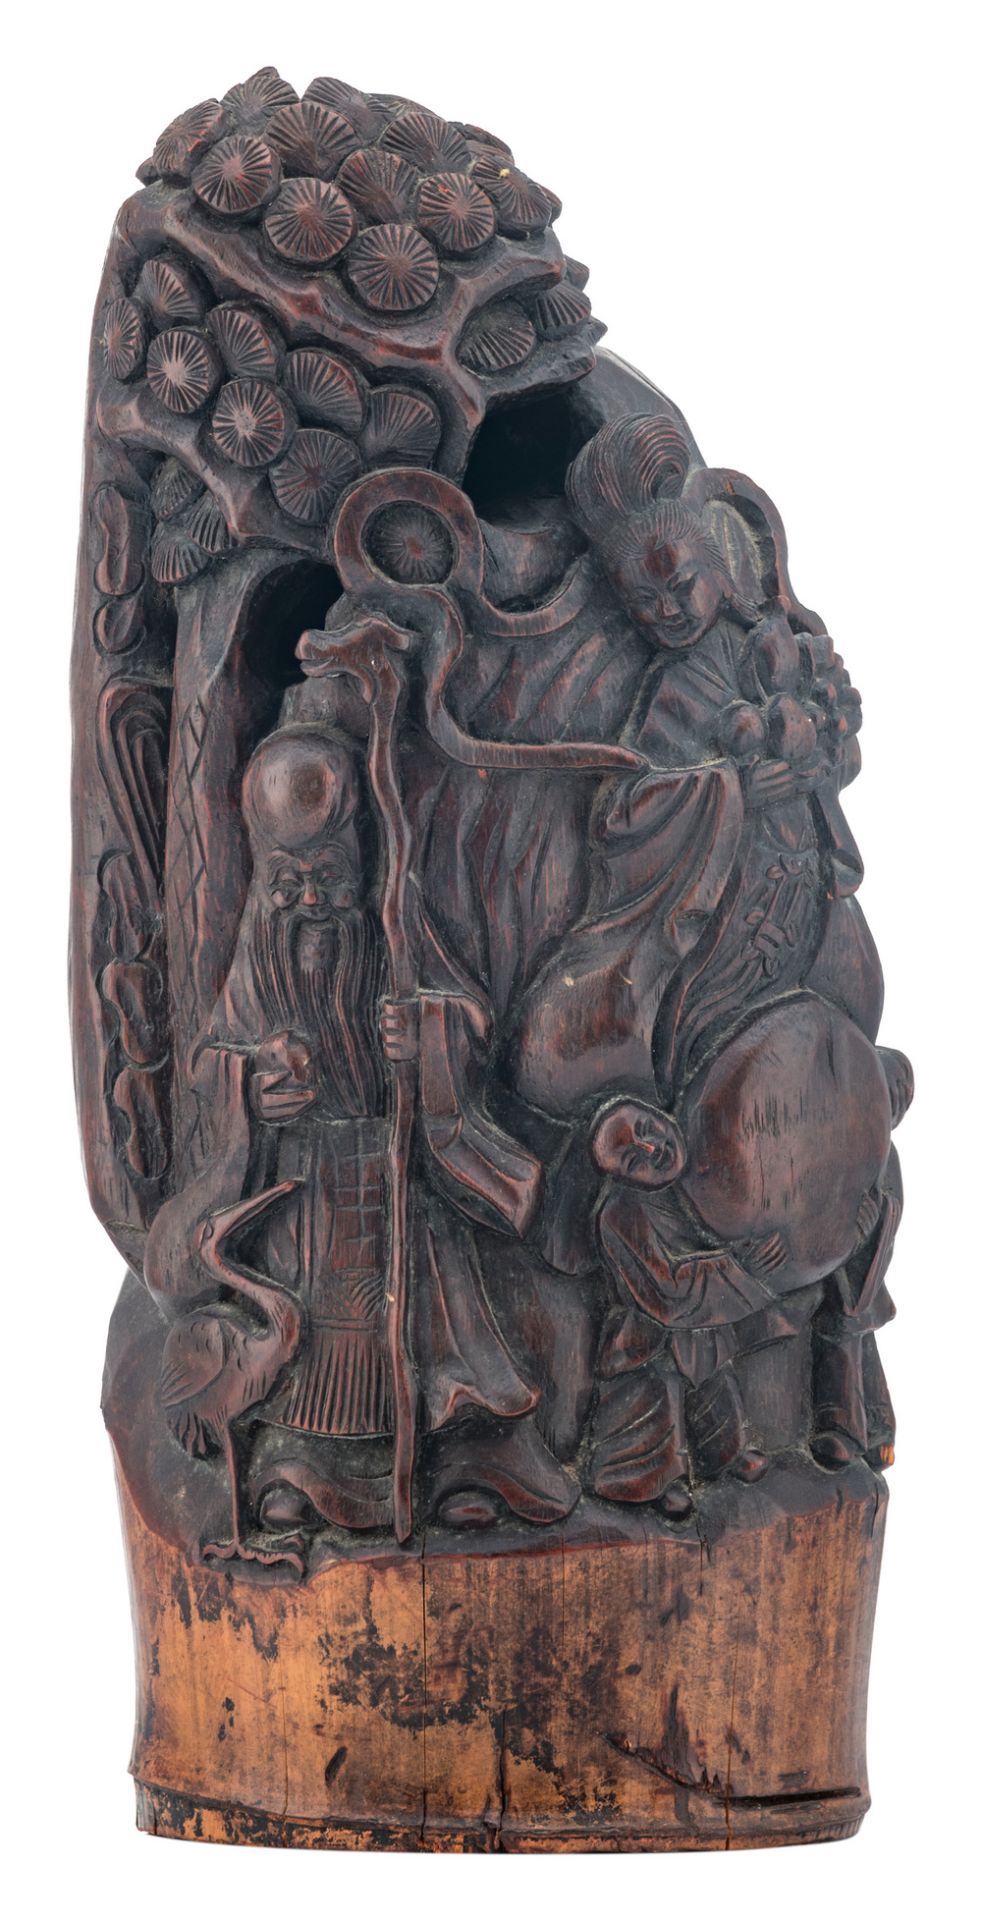 A Chinese bamboo sculpture, depicting the figures of Shou Xing, a Guanyin and some servants, H 40 cm